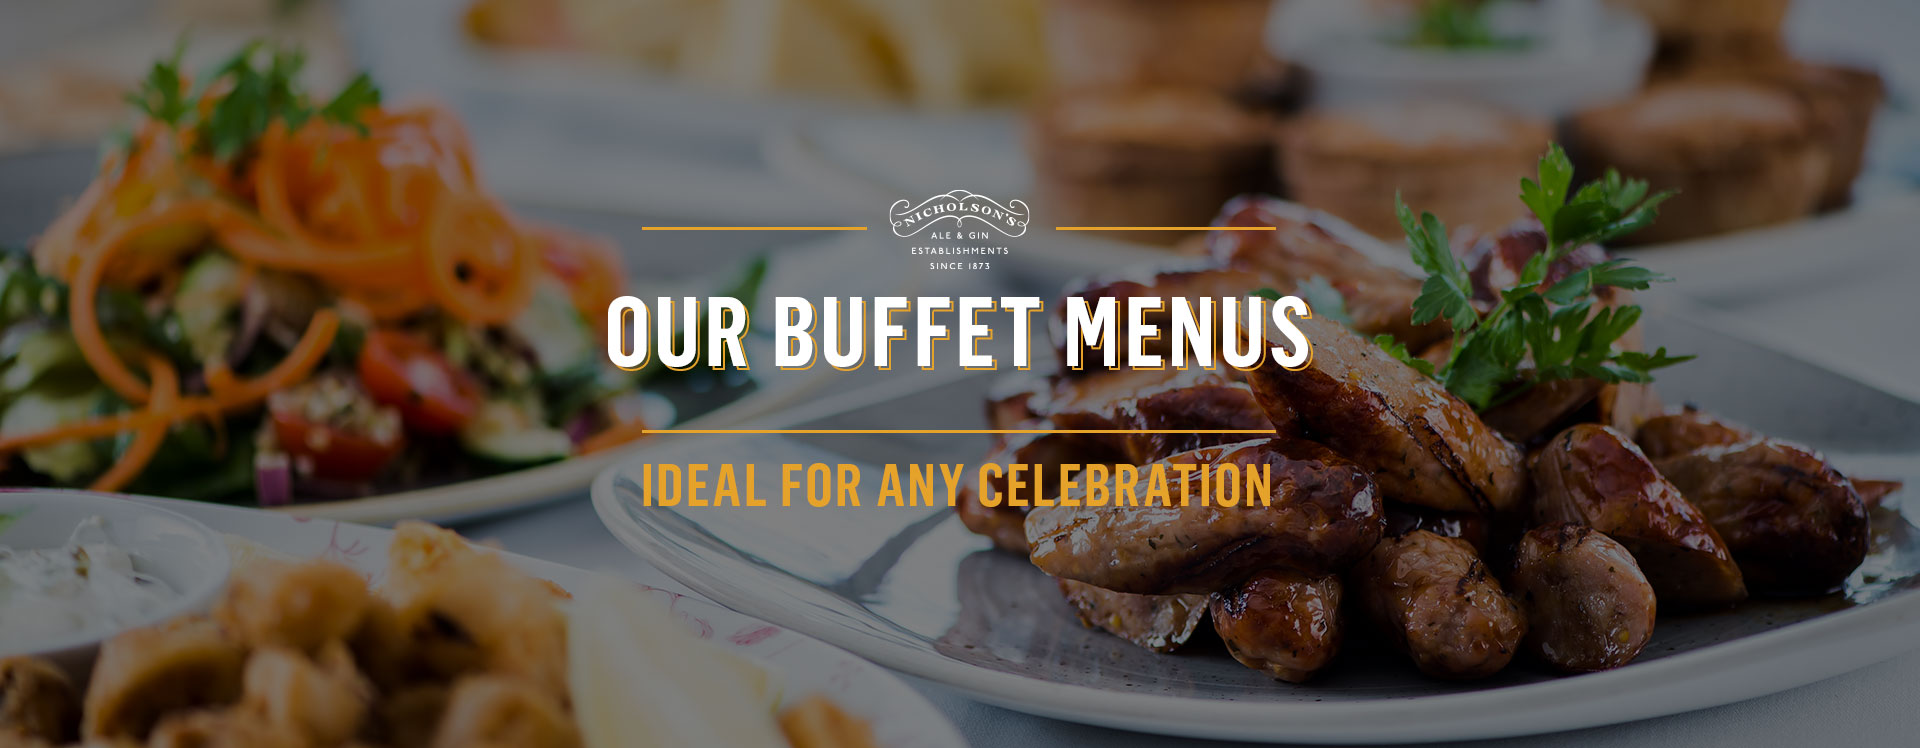 Buffet menu at The Sawyer's Arms - Book a table